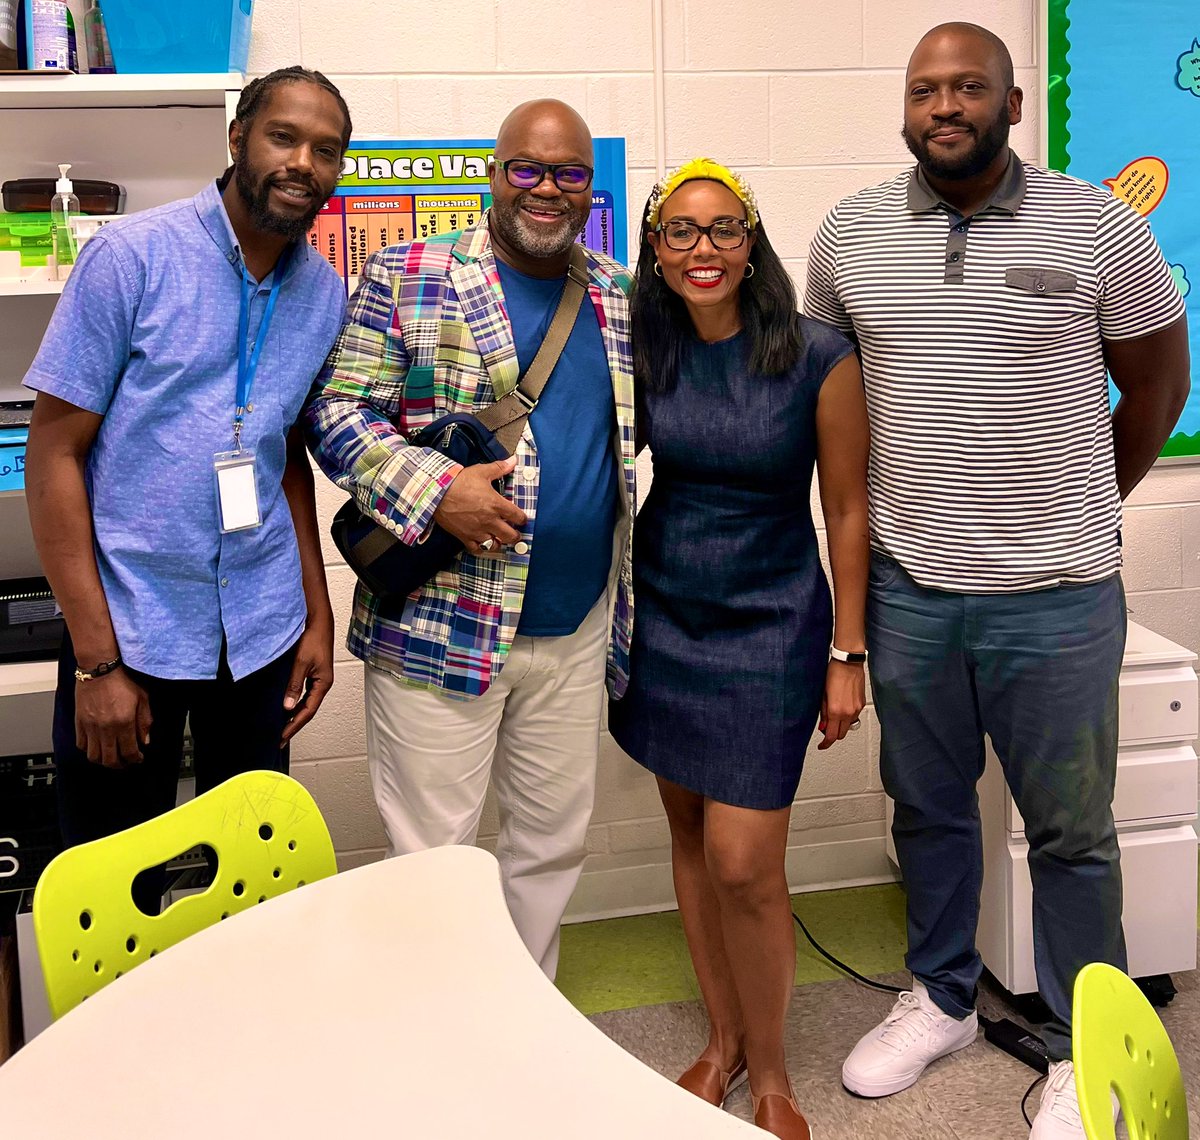 Hello 2022-23 Academic Year! Dropped in to @monumentacademy to affirm the hard work of our leaders, applaud the tenacity of our scholars, & to appreciate our 100% BLACK MALE MATH DEPARTMENT. 🙌🏽 This is how to know & show the way for our brilliant Black students! #ProudBoardChair